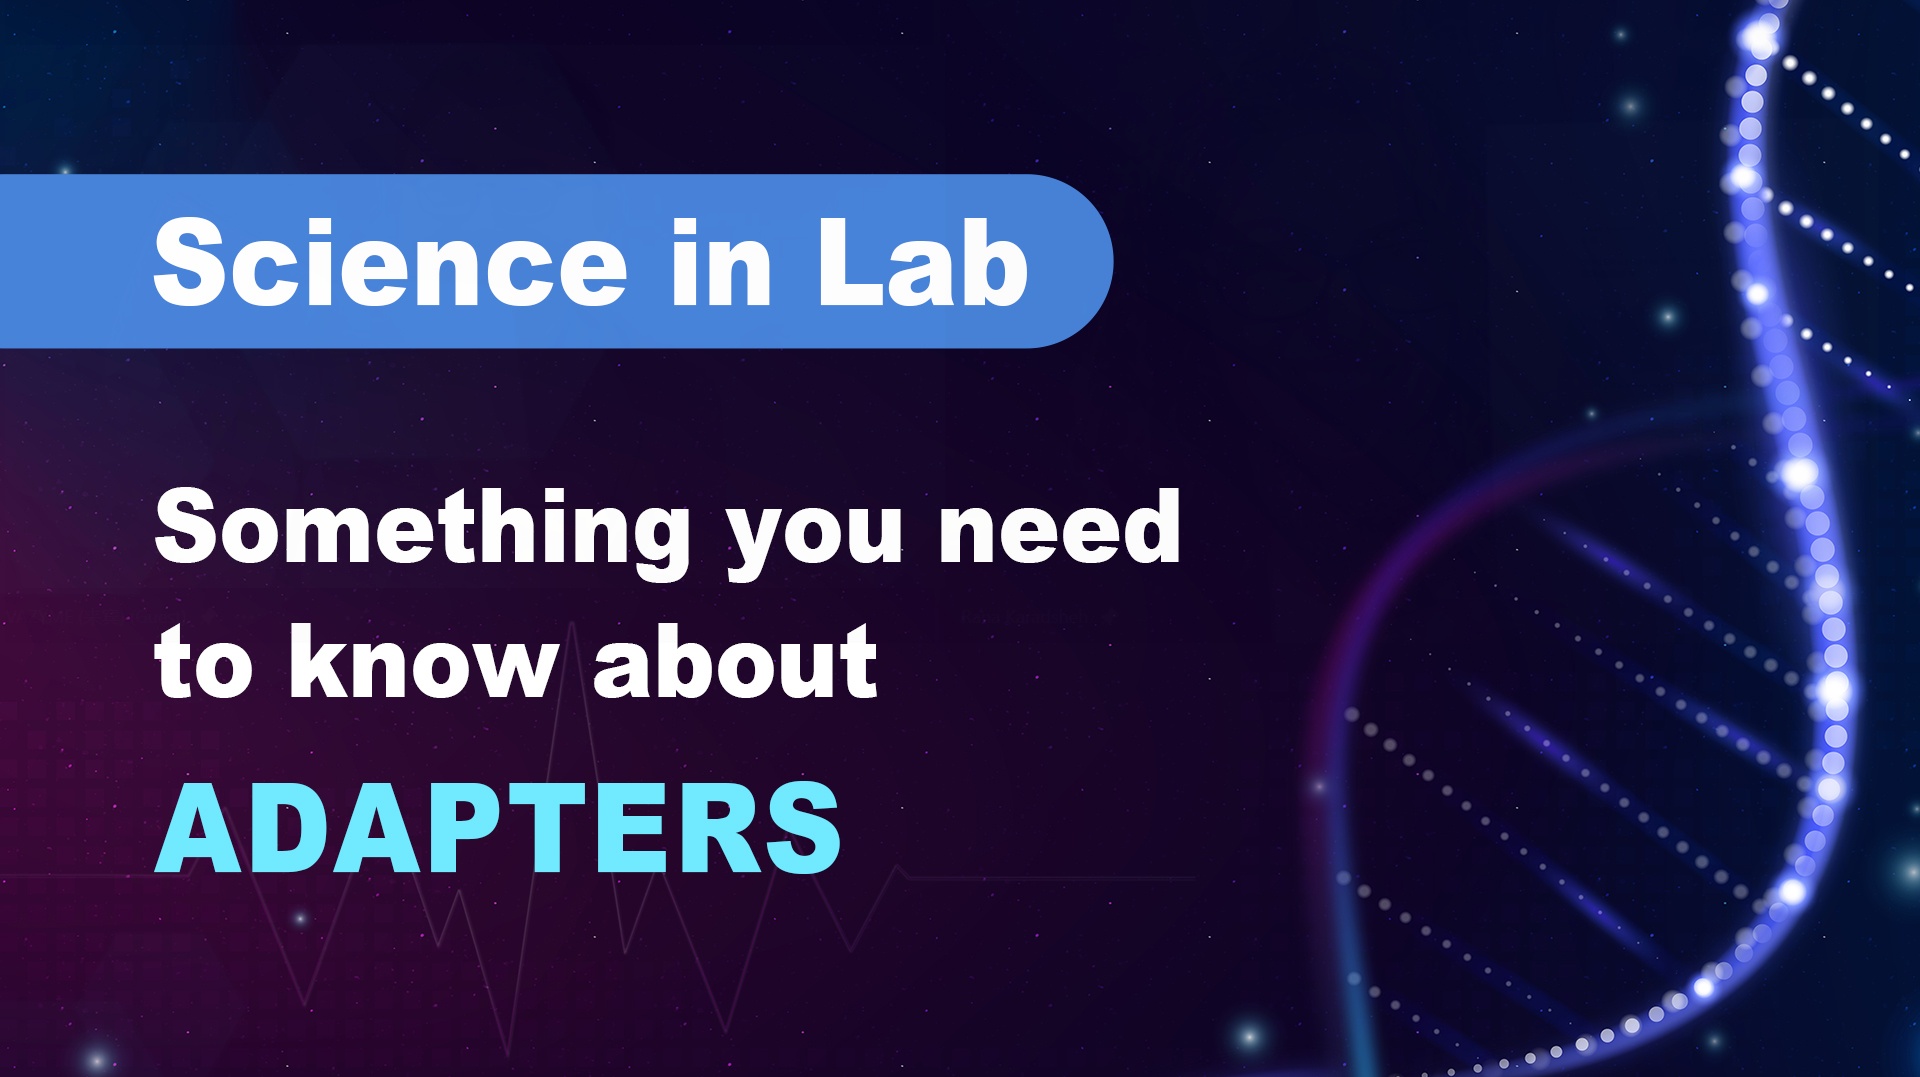 Science in Lab | Something you need to know about ADAPTERS